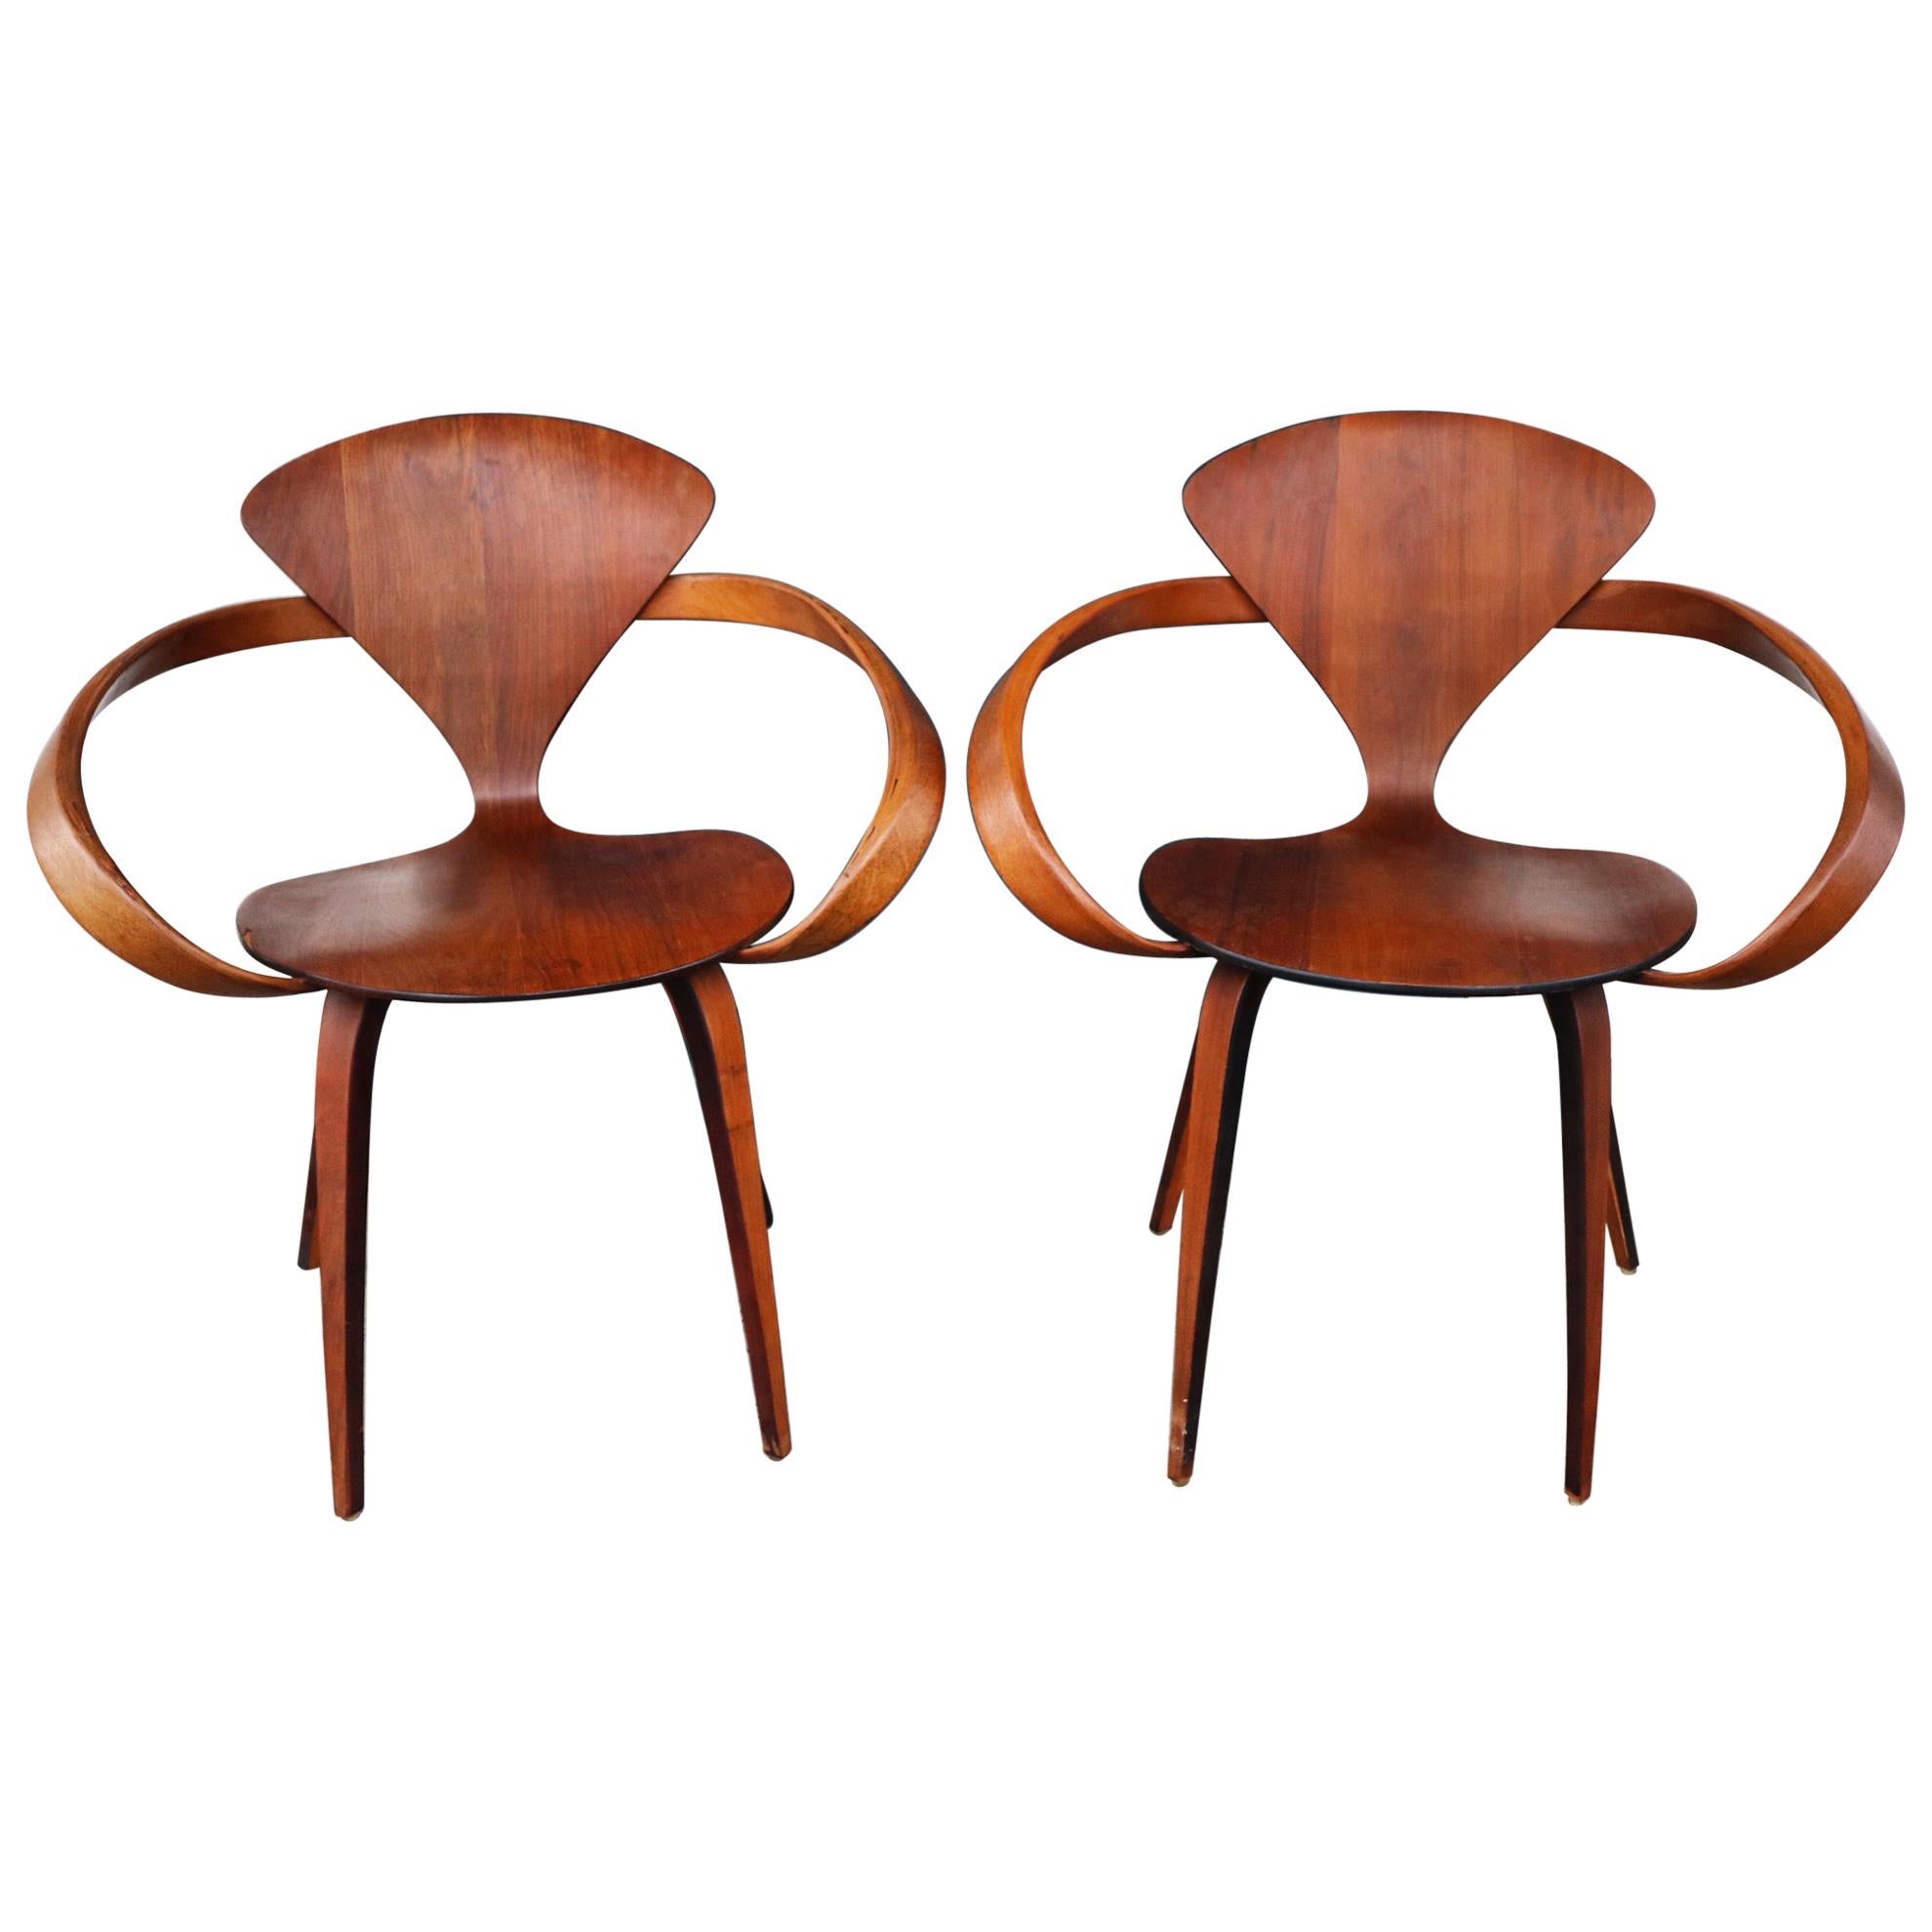 Pair of Norman Cherner Bentwood Pretzel Chairs in Walnut for Plycraft